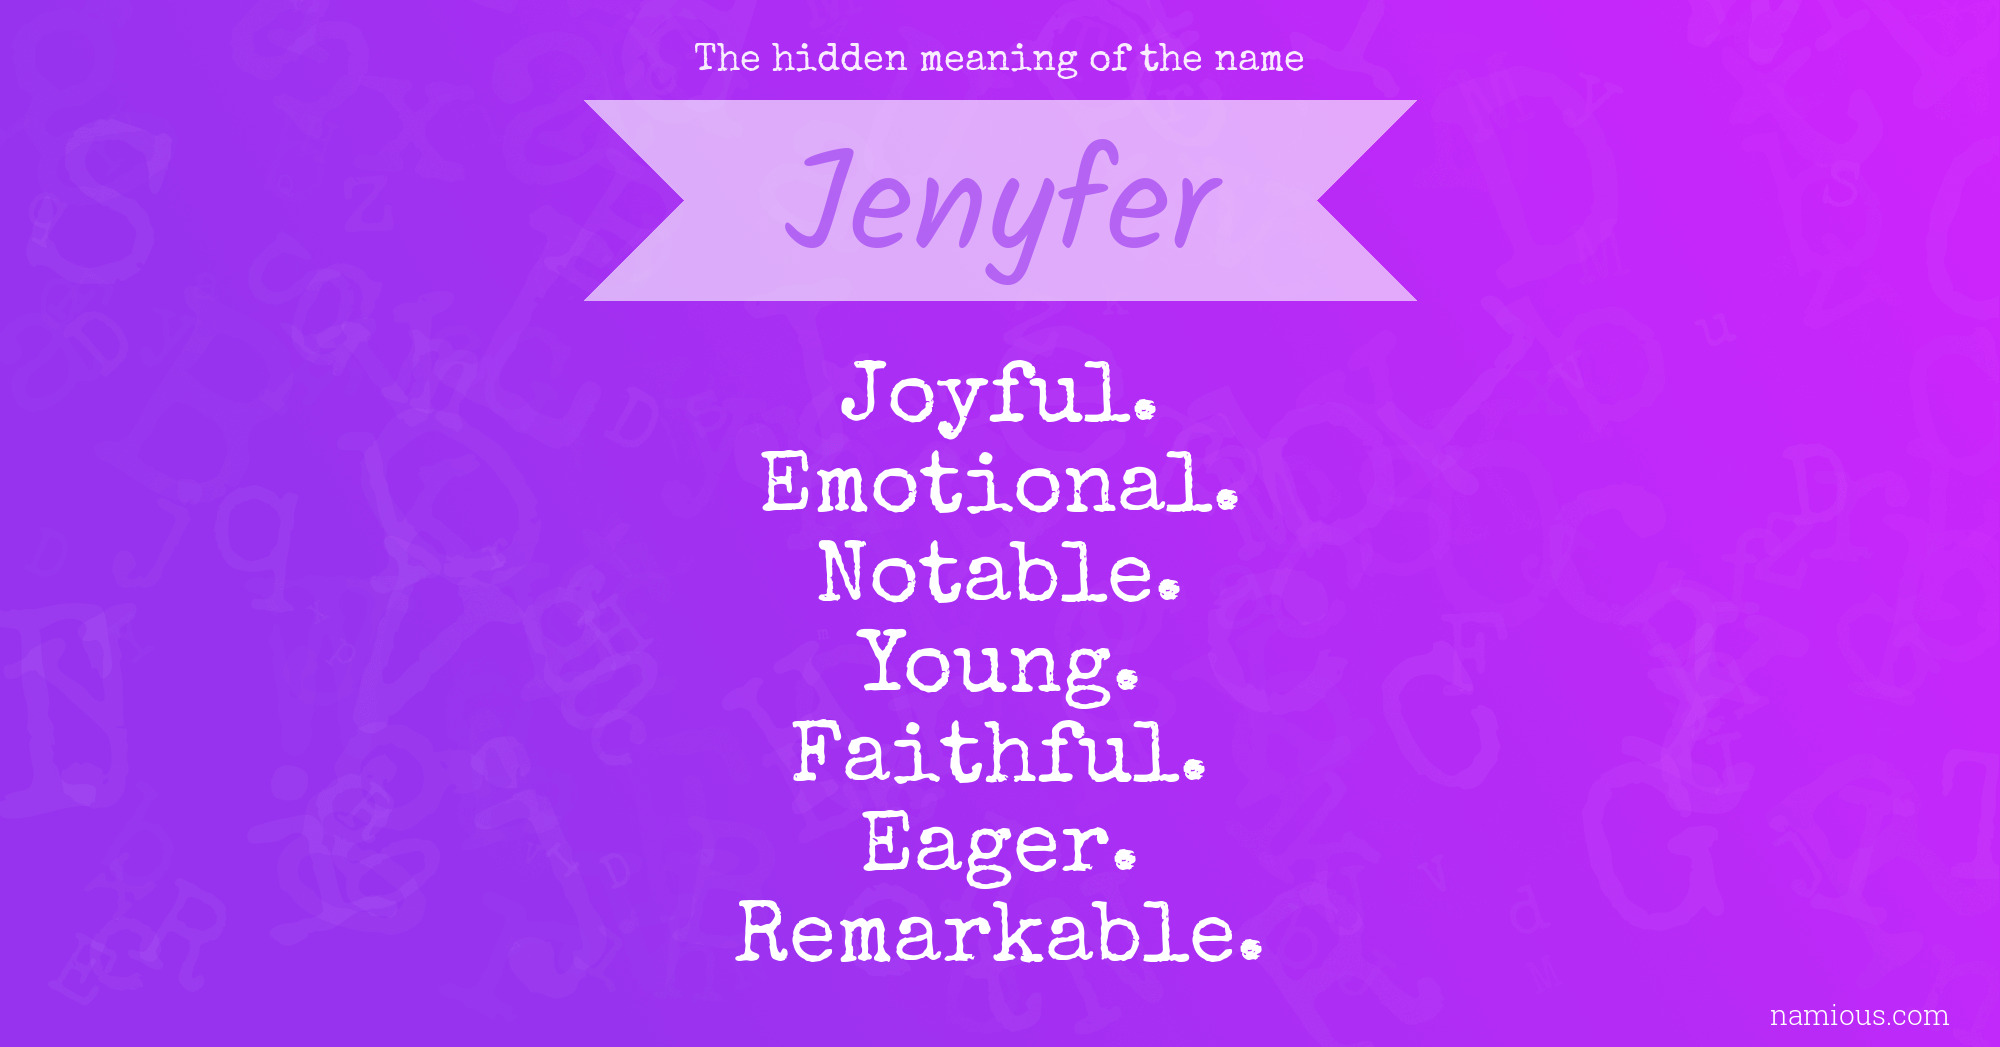 The hidden meaning of the name Jenyfer